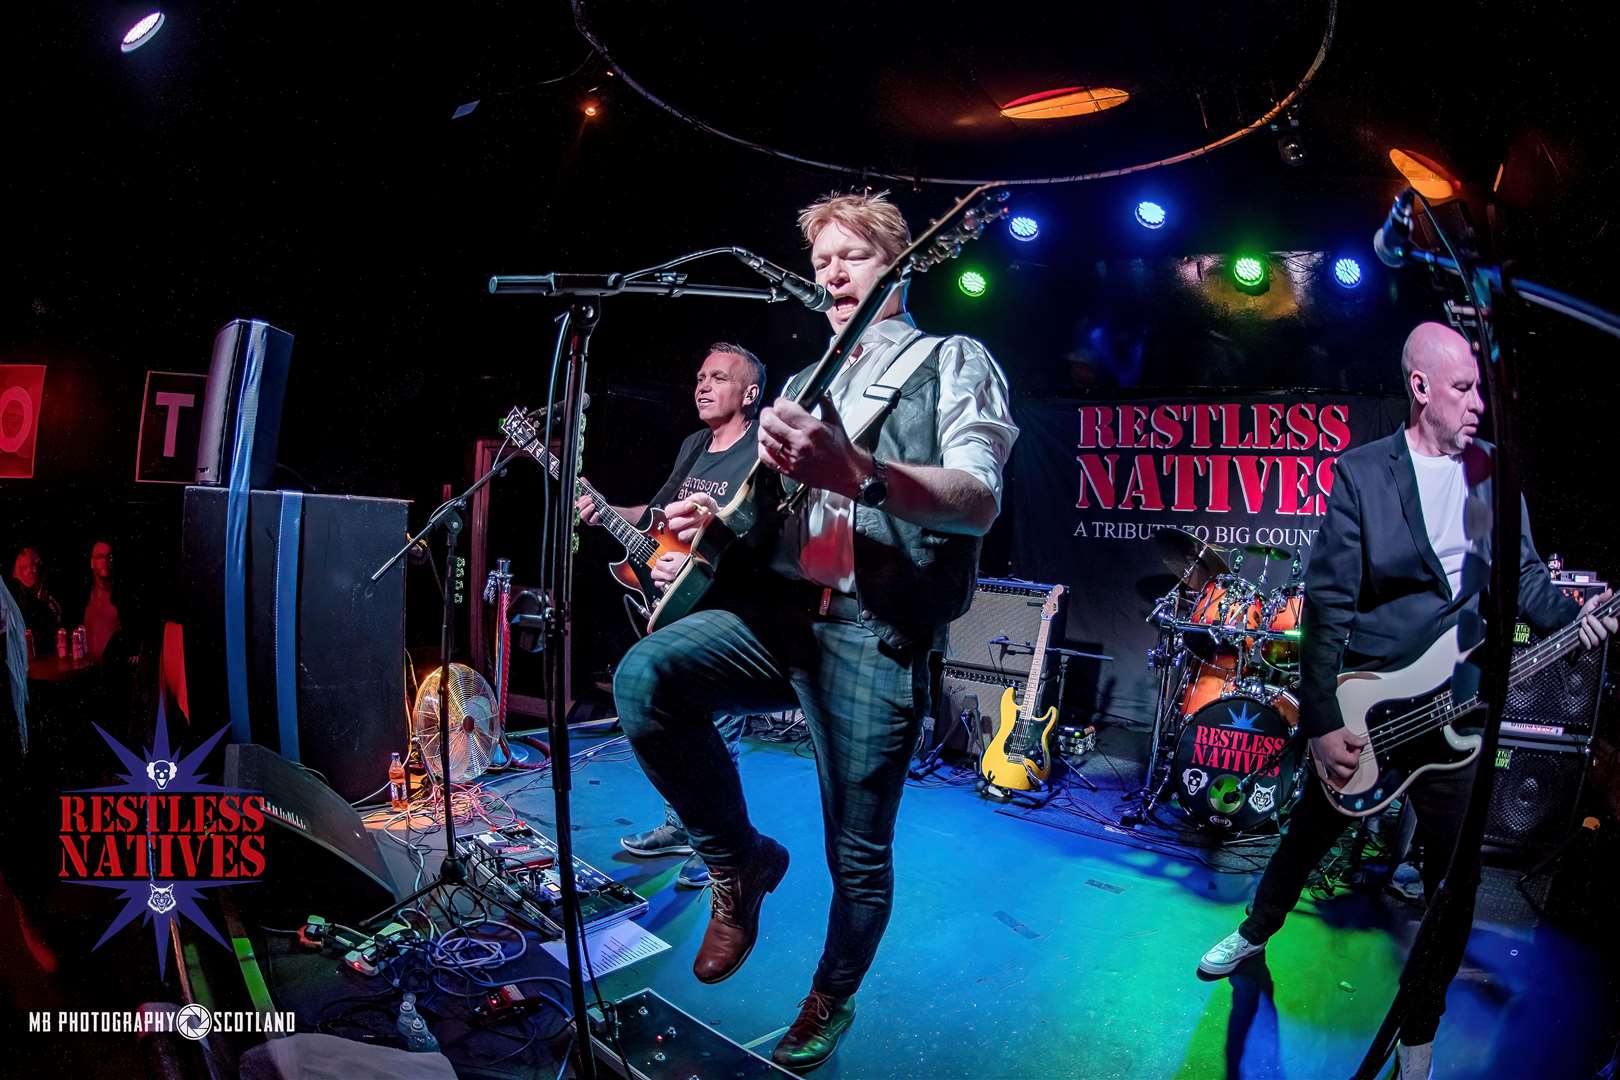 Restless Natives are looking forward to playing for Big Country fans in Forres.